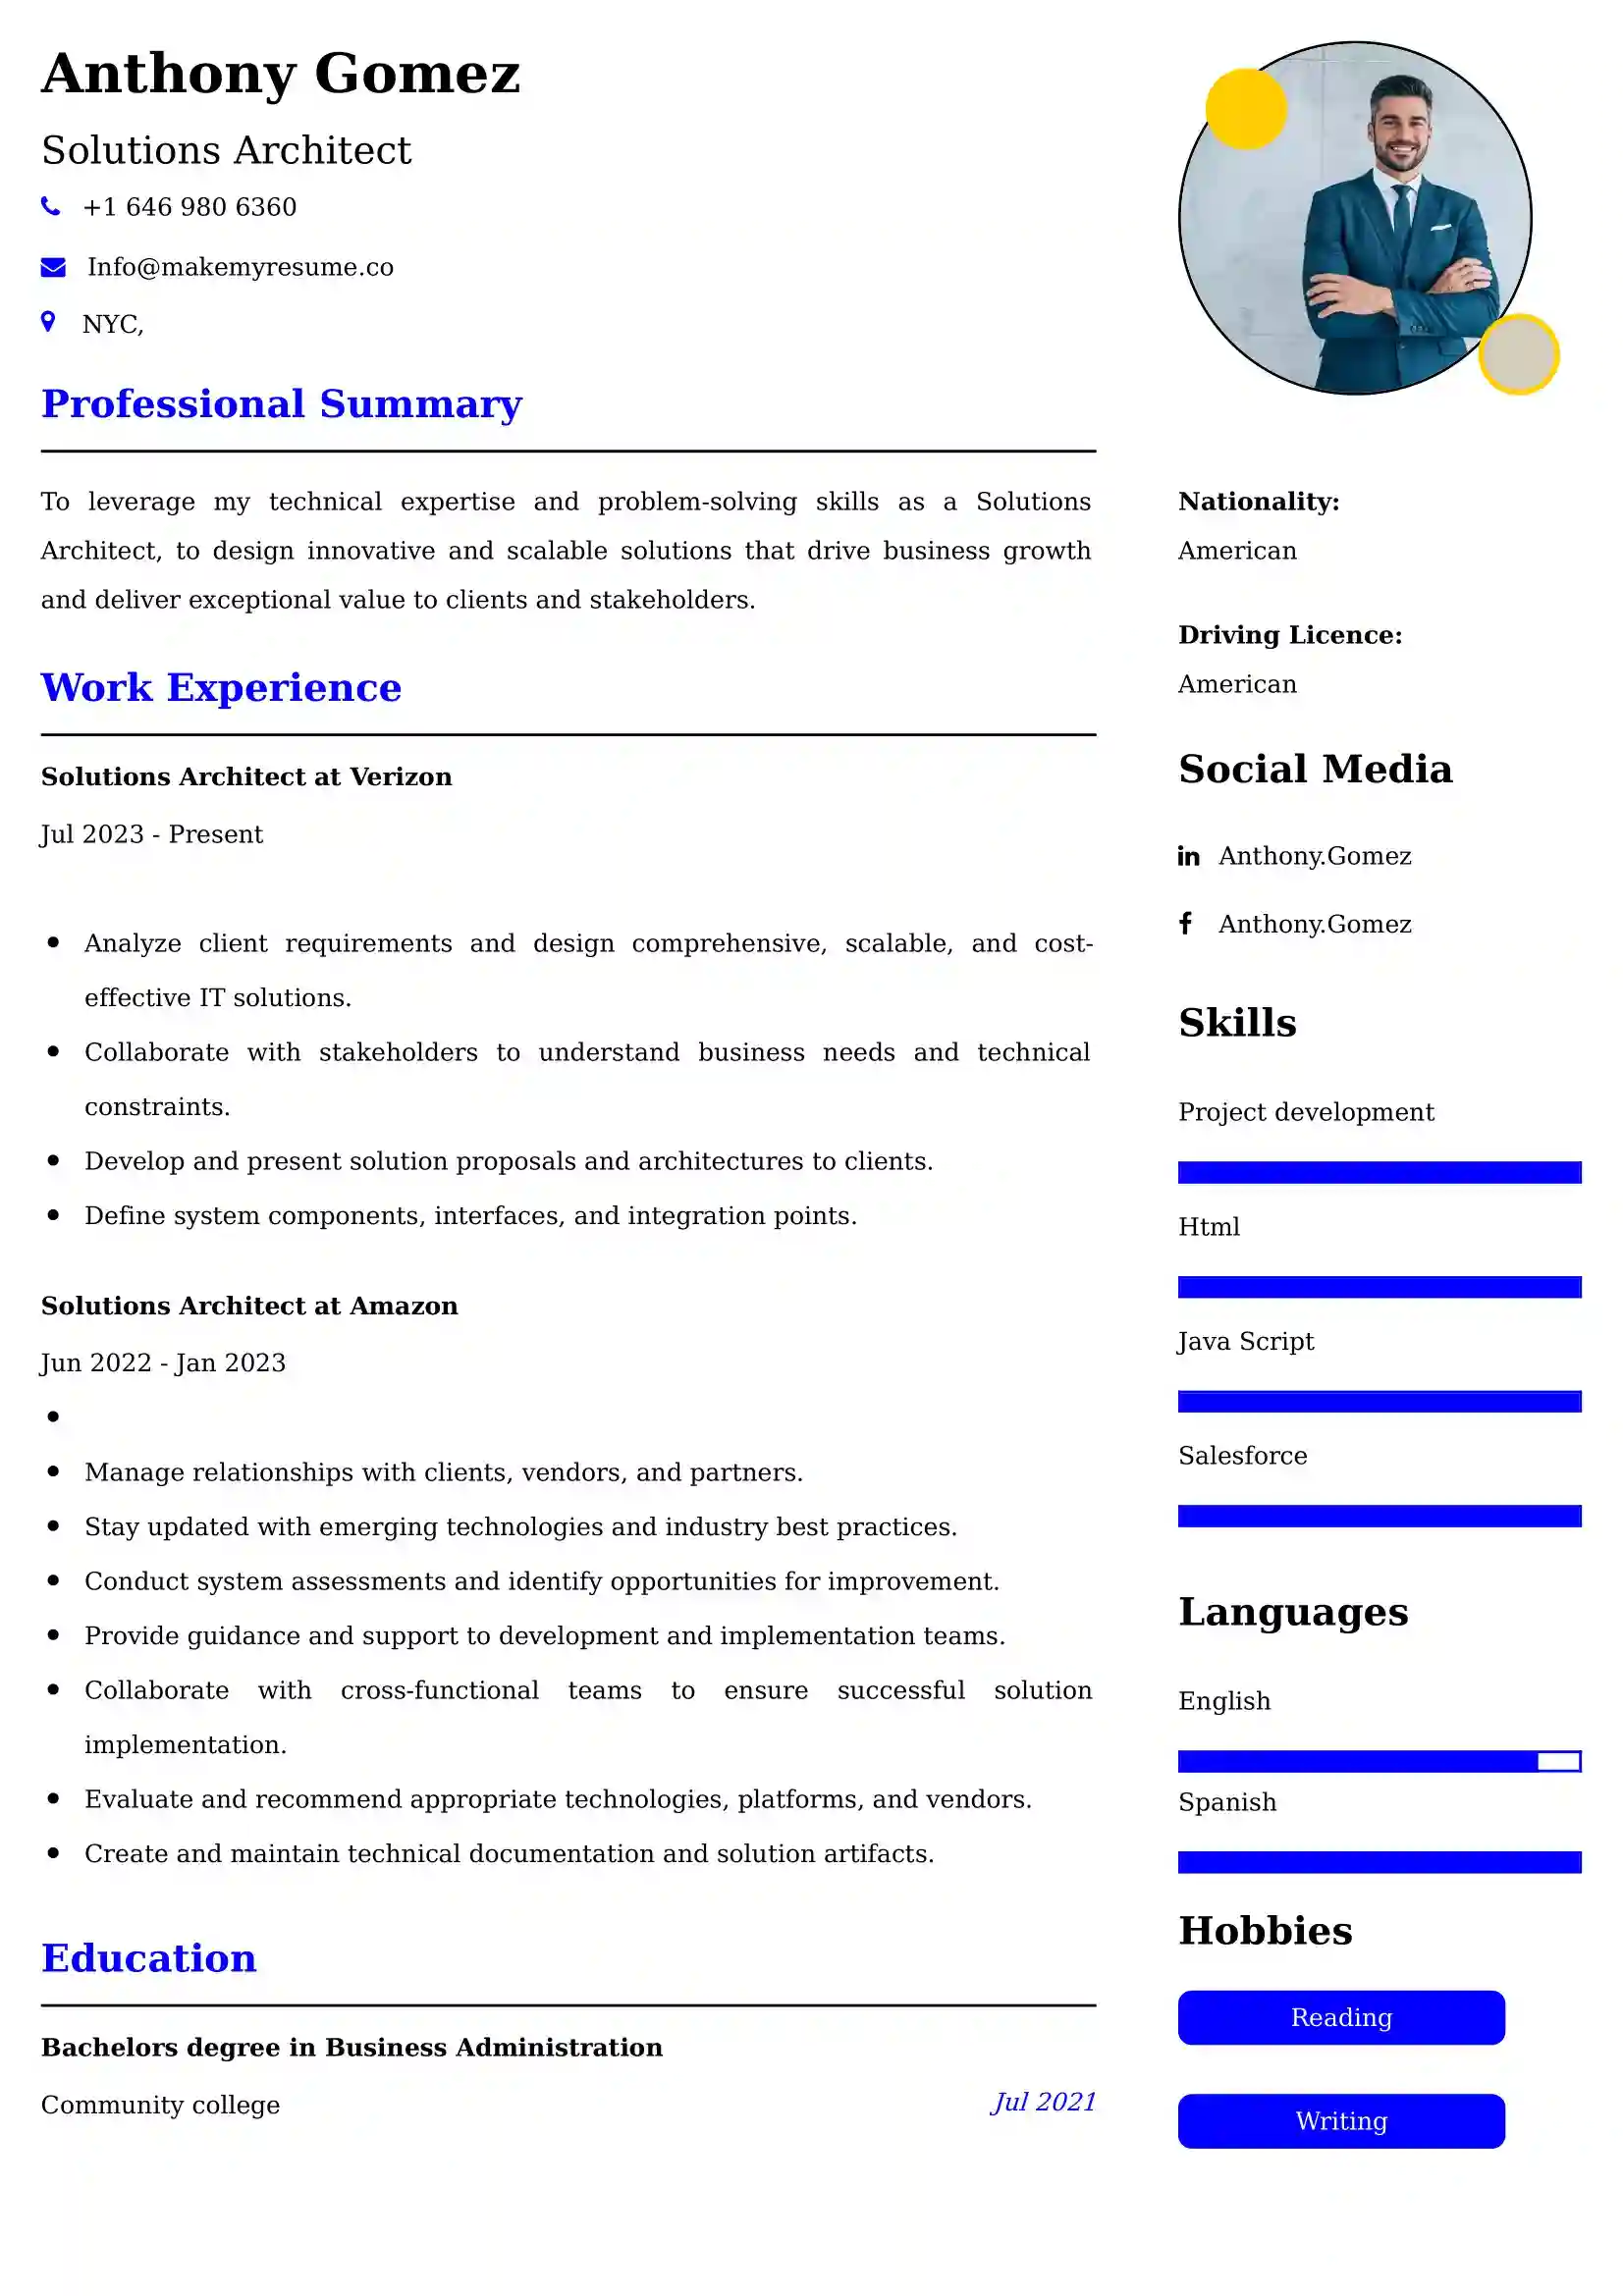 Solutions Architect Resume Examples for UAE